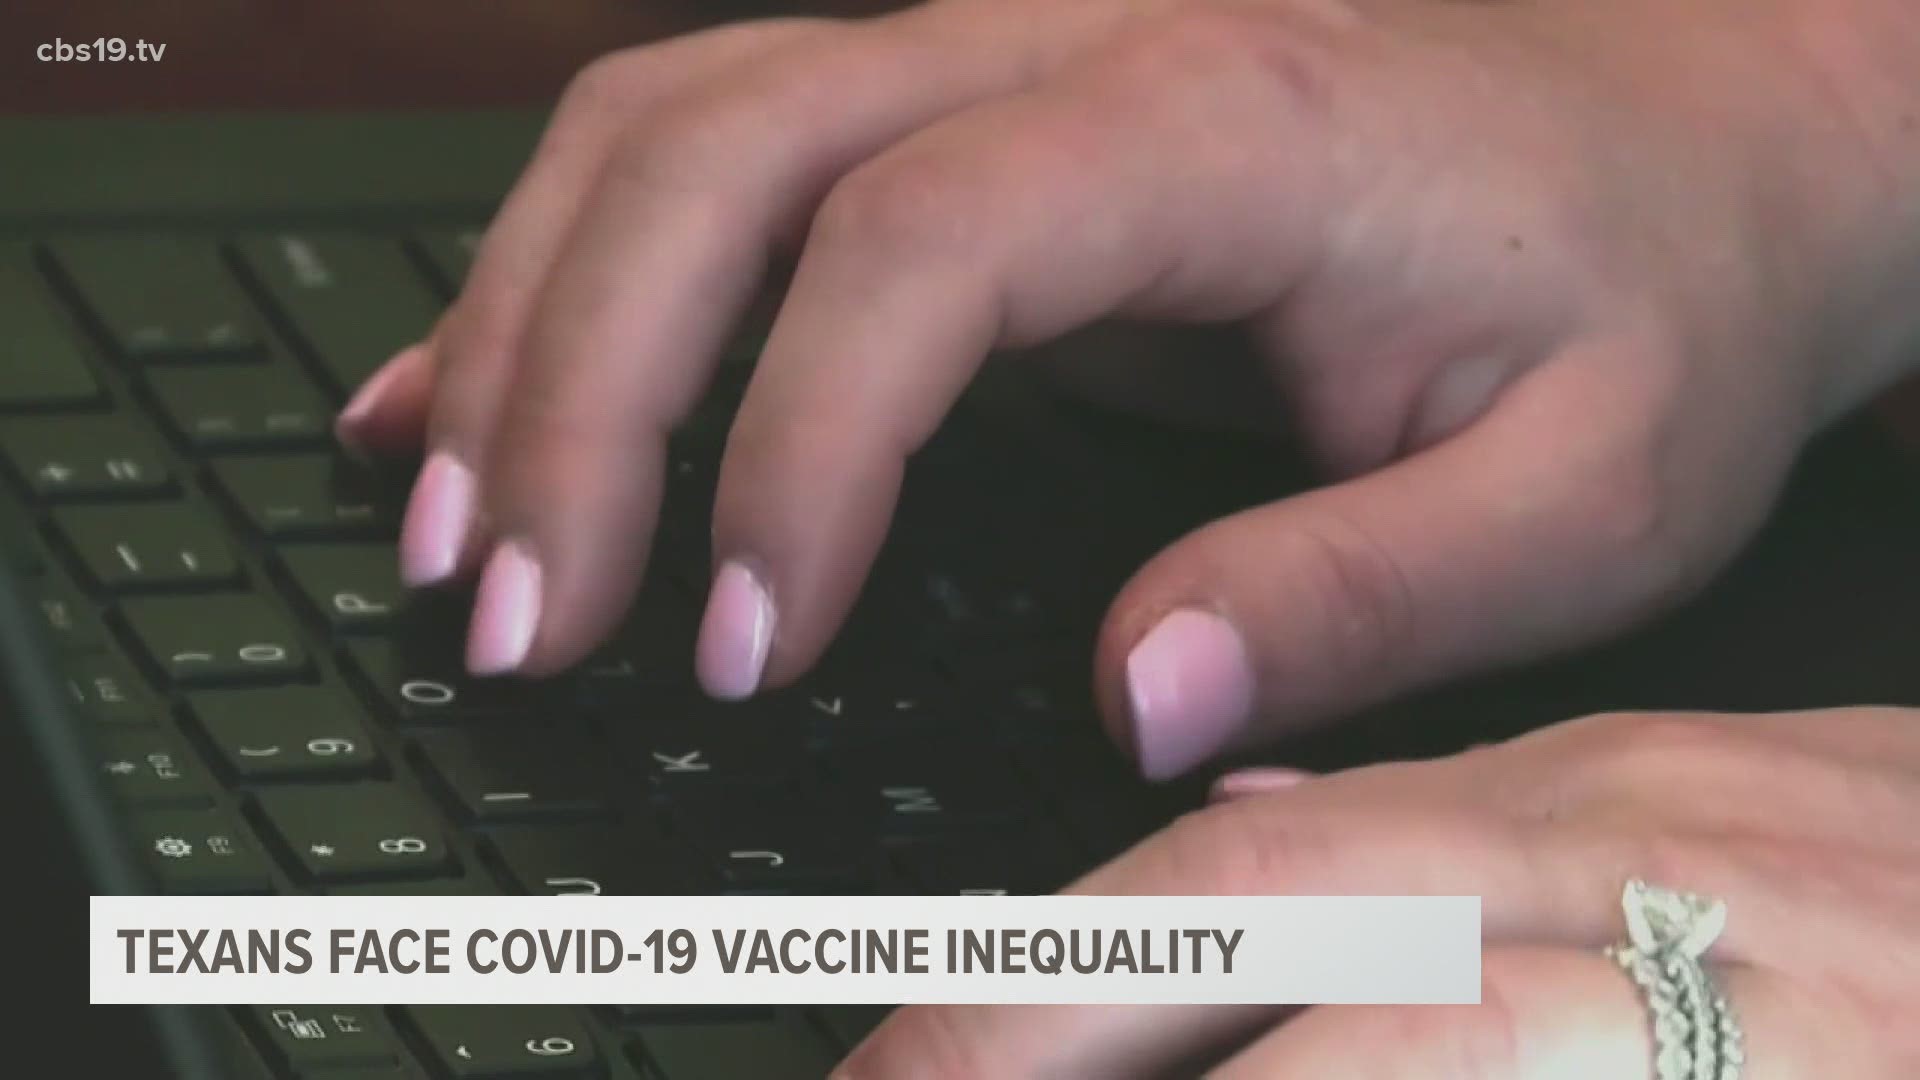 “I went looking for the website to register for COVID-19 vaccinations in Tyler, and couldn't find it,” said Michael Hingson, who is blind.